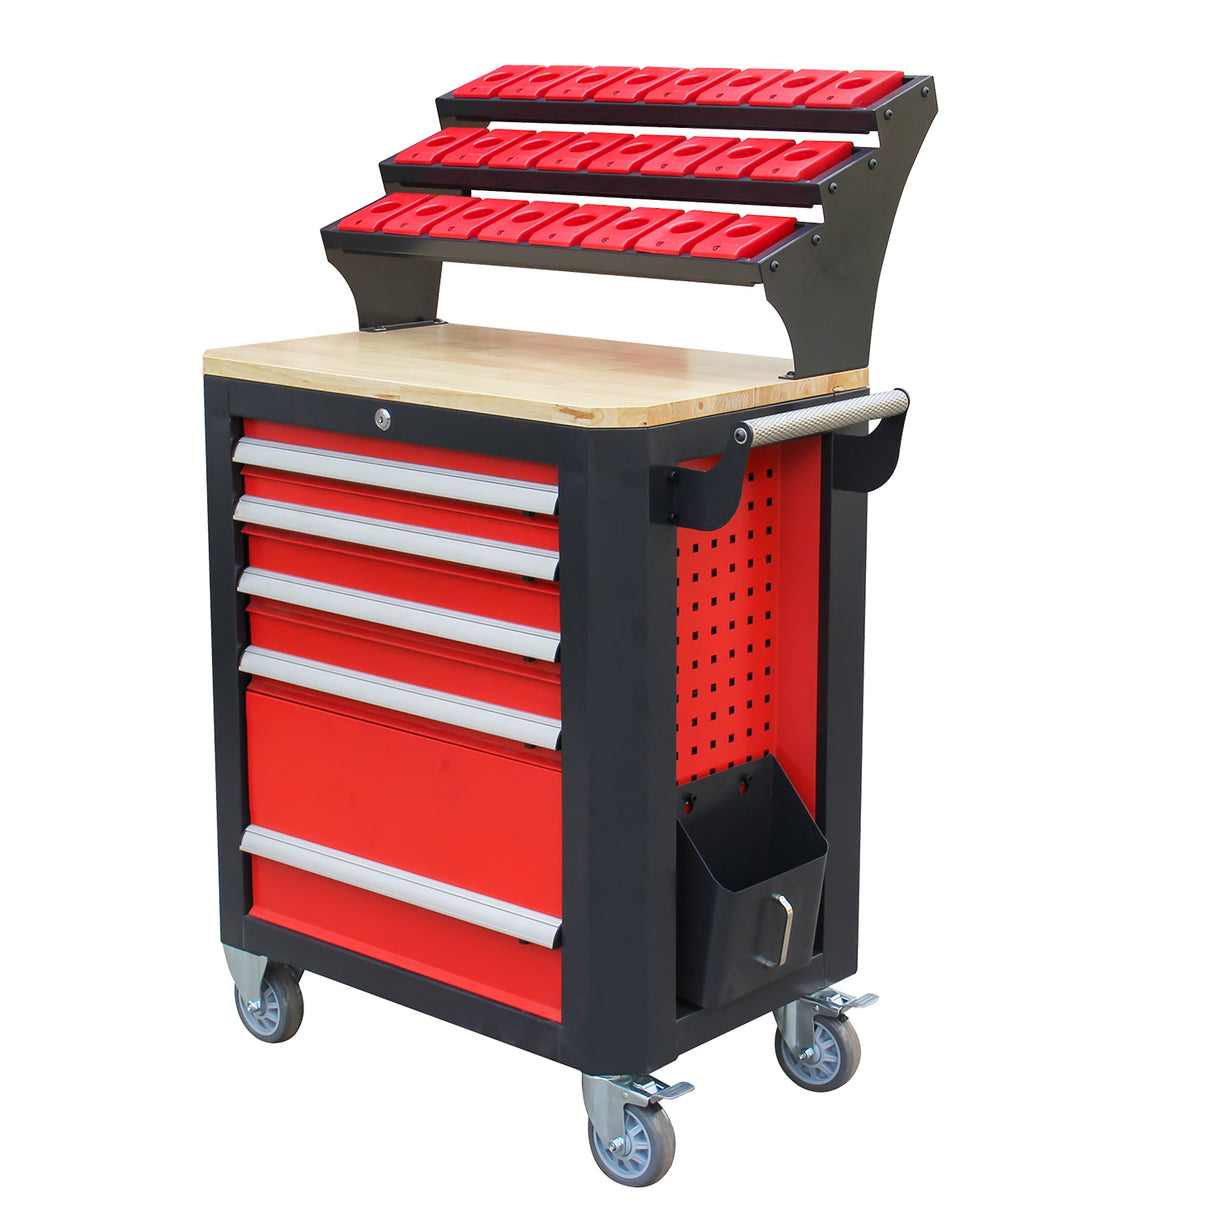 Kaka industrial HQC-540A(BT40) Tool Holder CNC Tool Cart, 5 Drawer Tool Chest 77 Capacity 4 Ball-Bearing Glided Drawers, Drawer Mobile Work Station